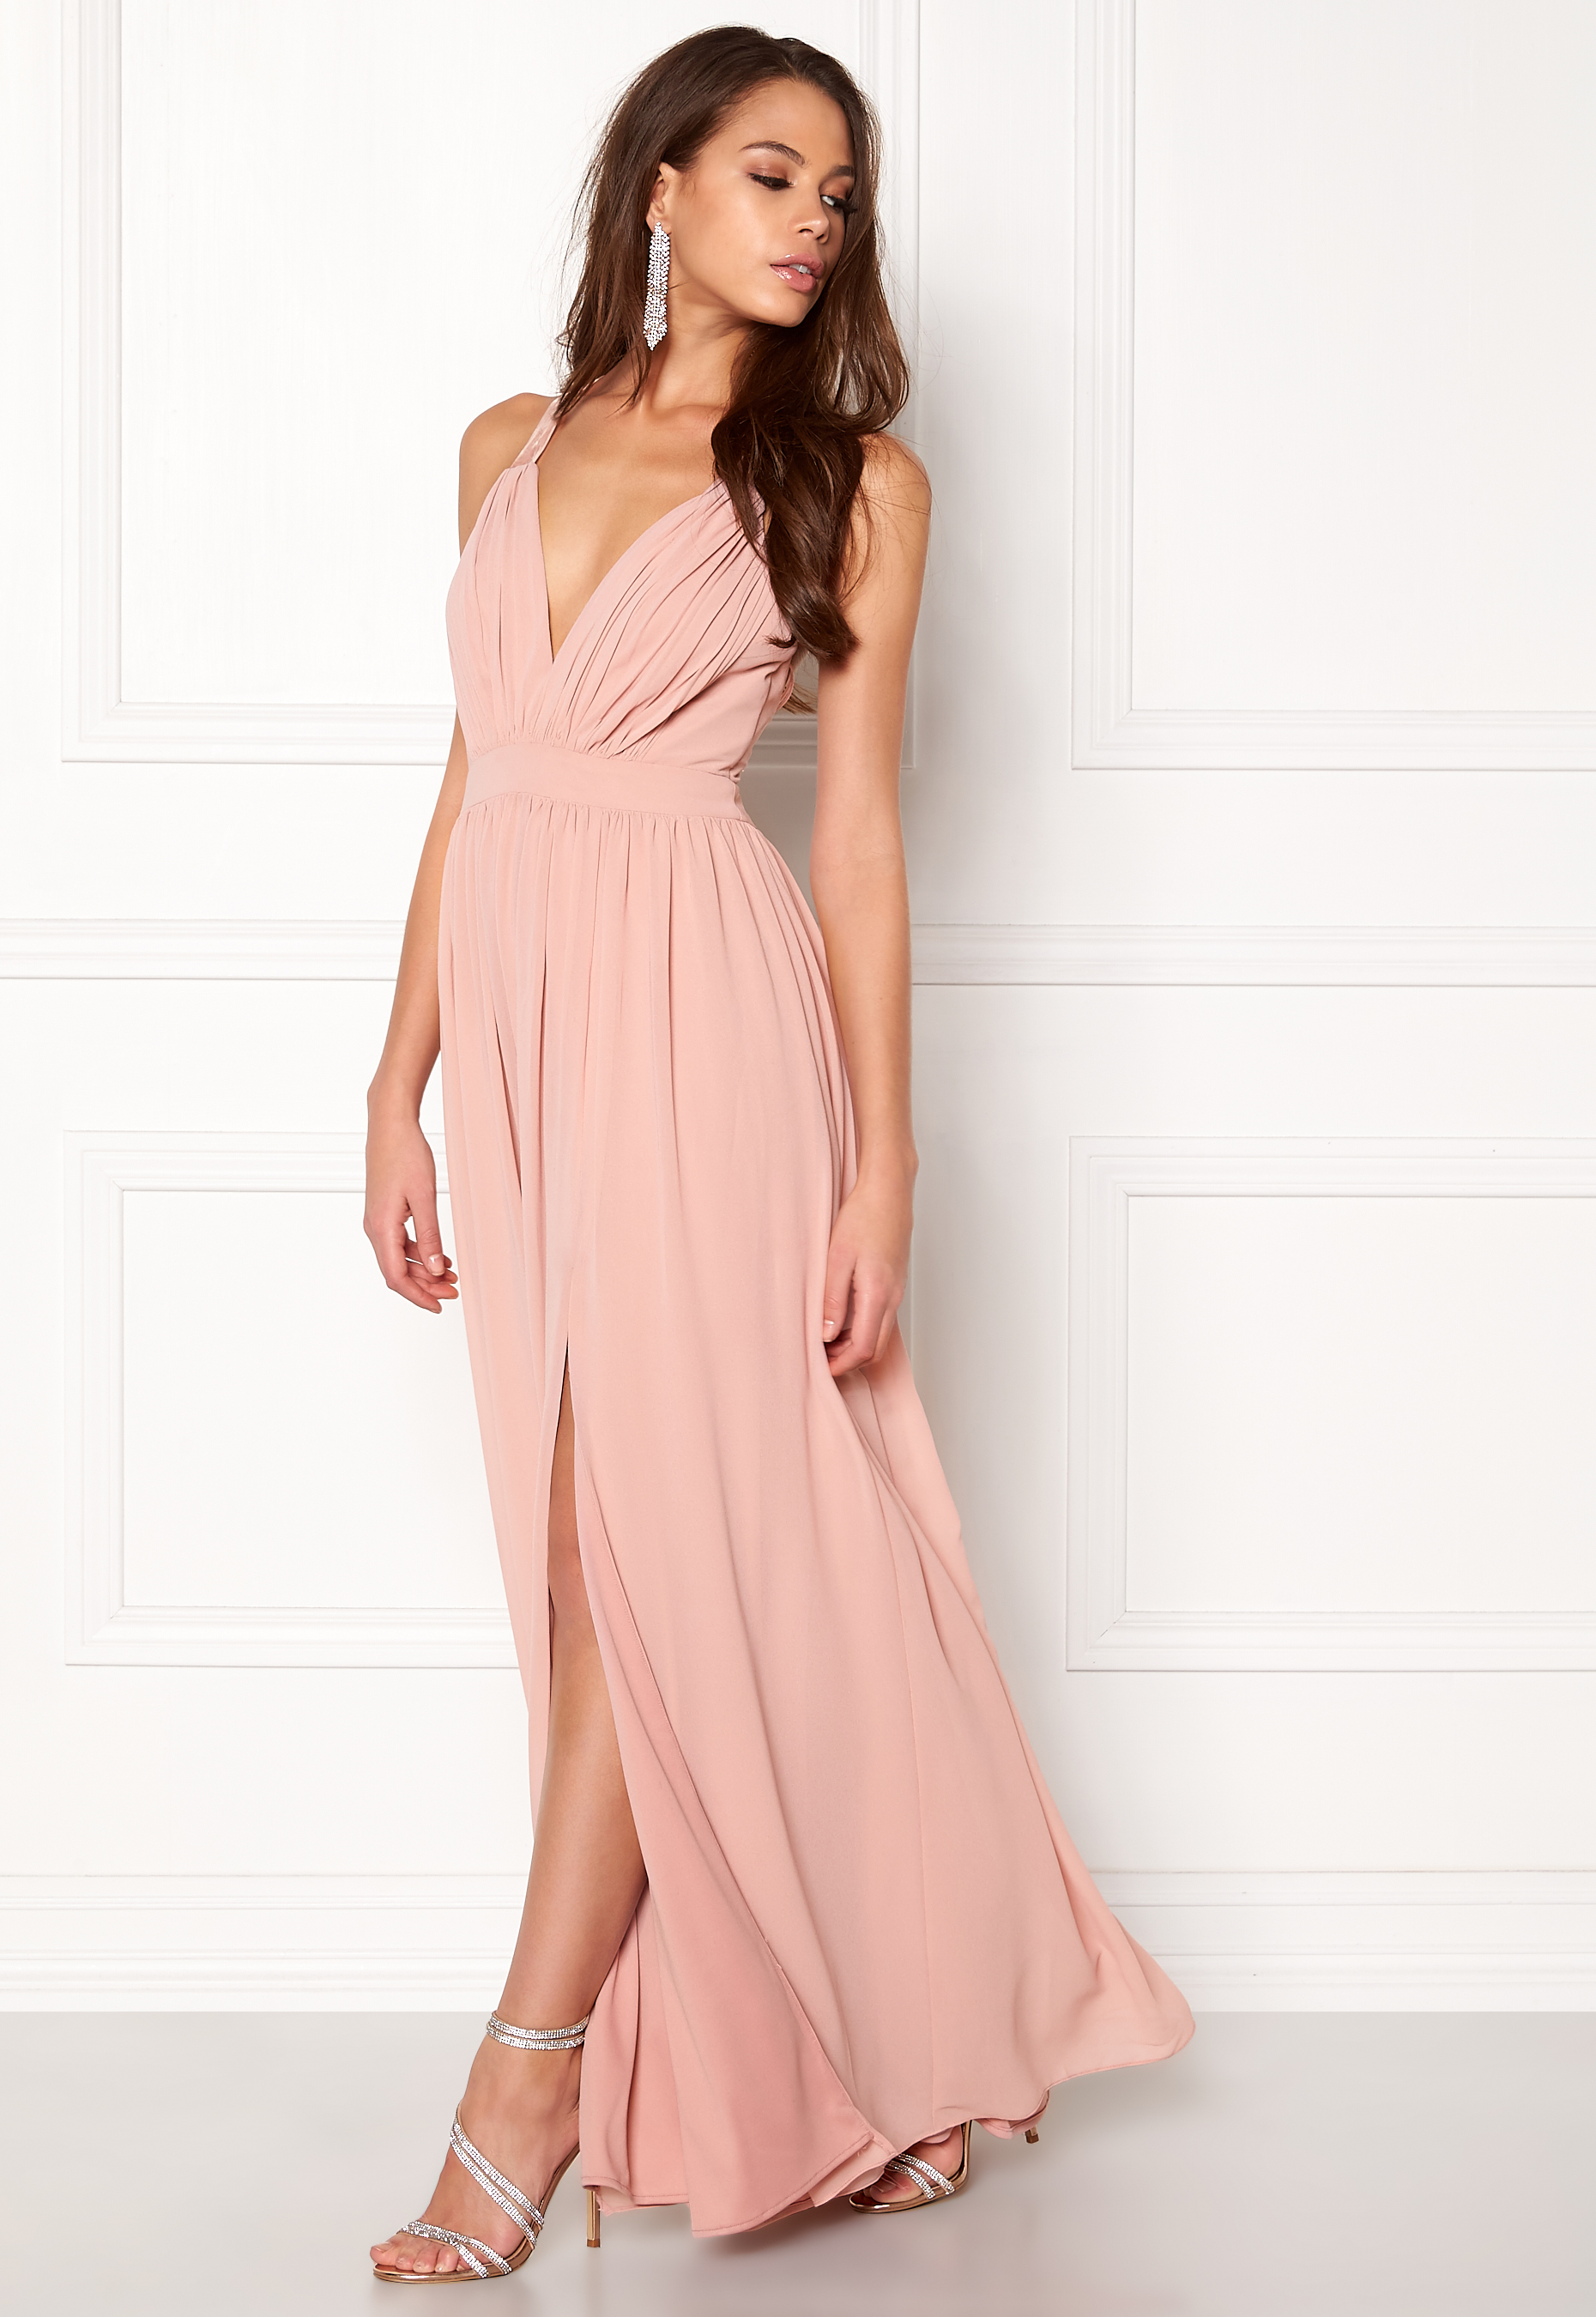 Dusty Pink Maxi Hotsell, 56% OFF | www ...